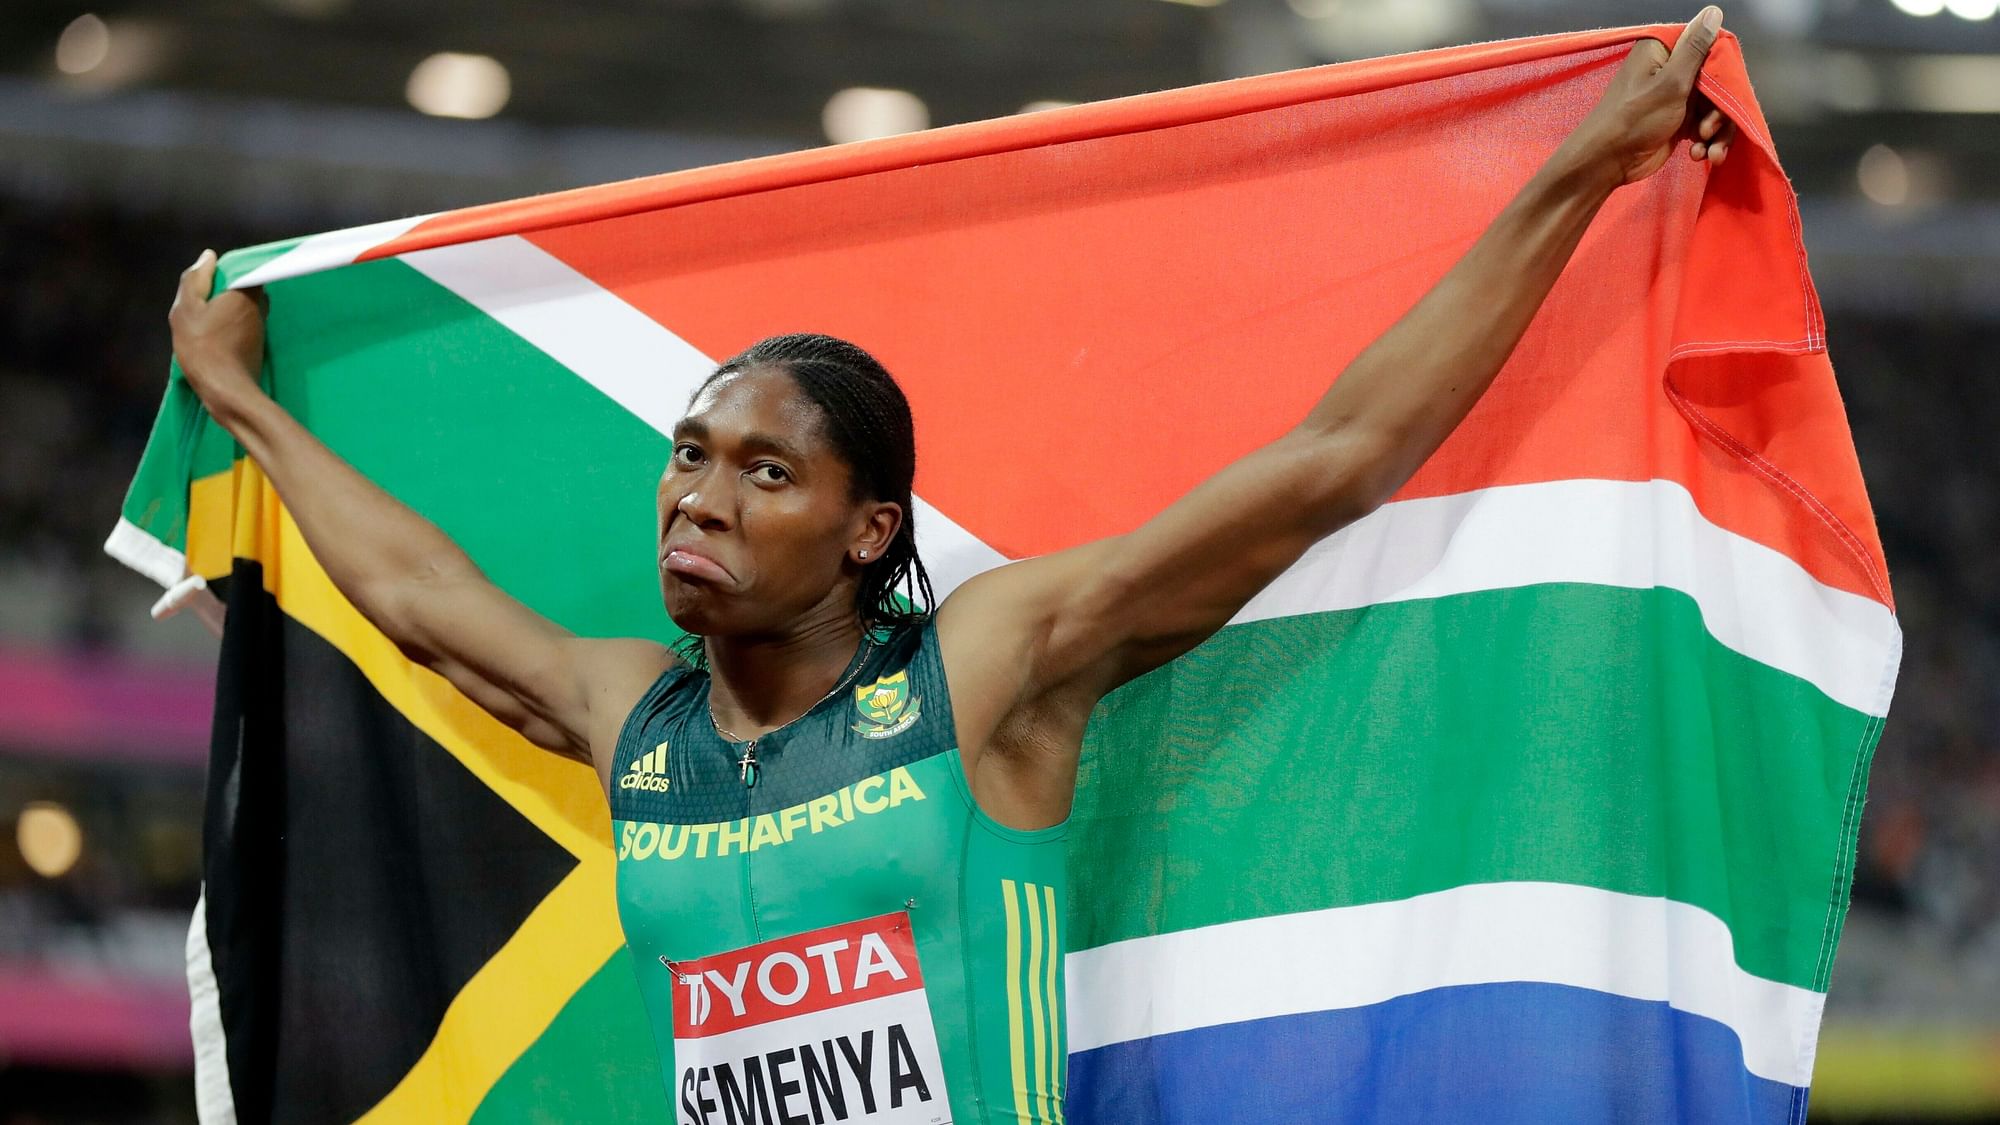 Caster Semenya is the 2012 and 2016 Olympic gold medalist in the women’s 800m event.